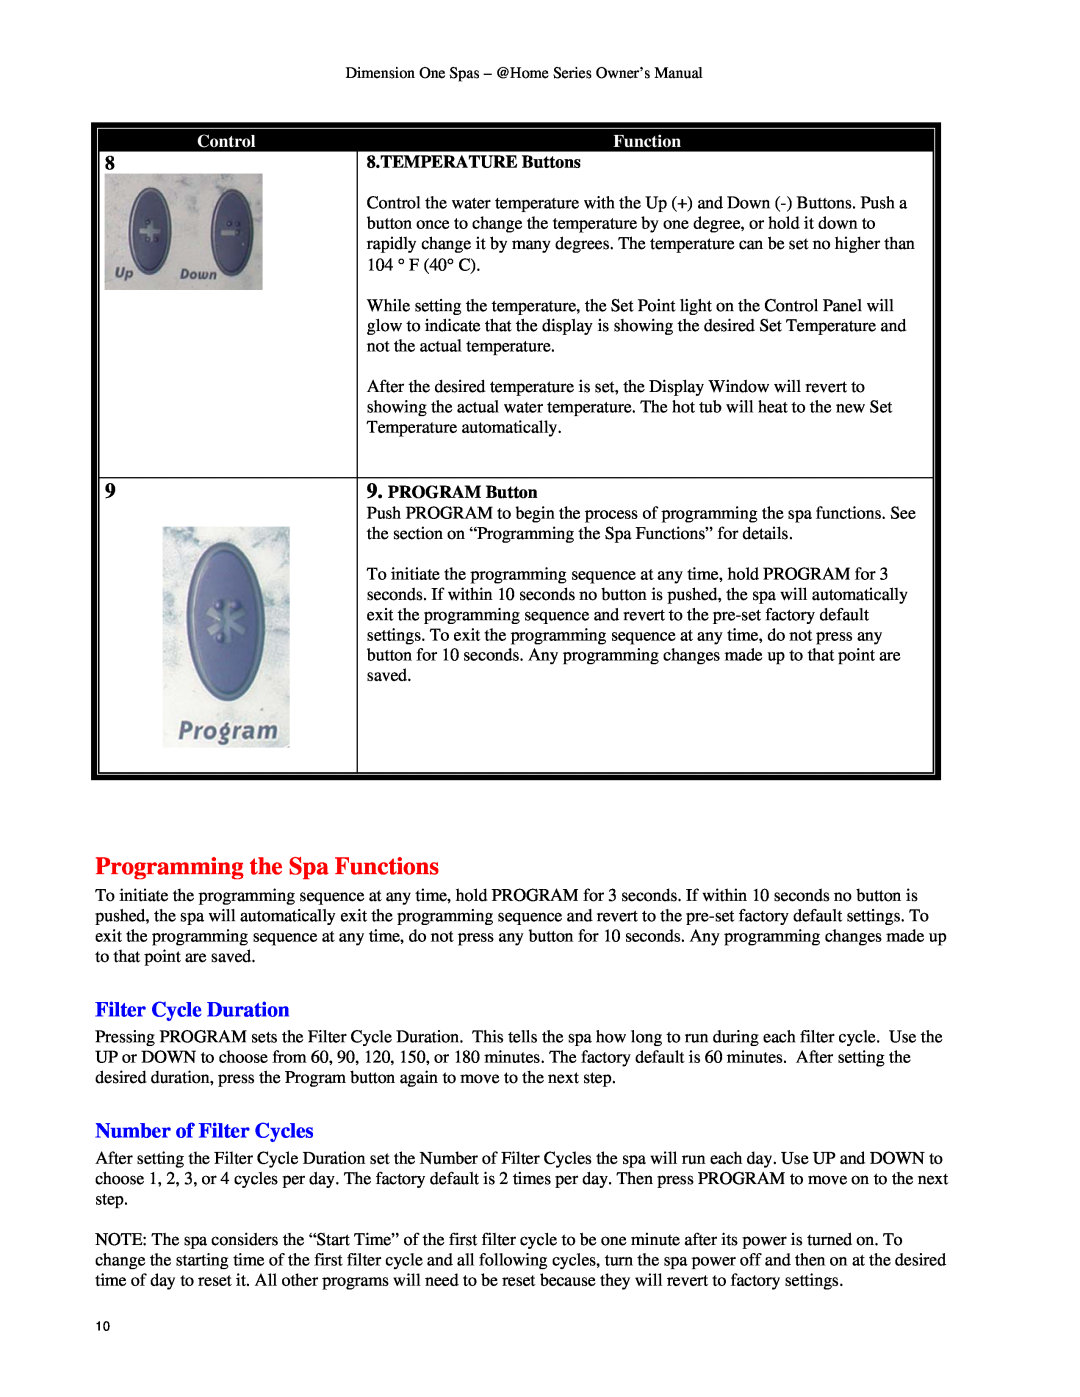 Dimension One Spas Home Series Programming the Spa Functions, Filter Cycle Duration, Number of Filter Cycles, Control 